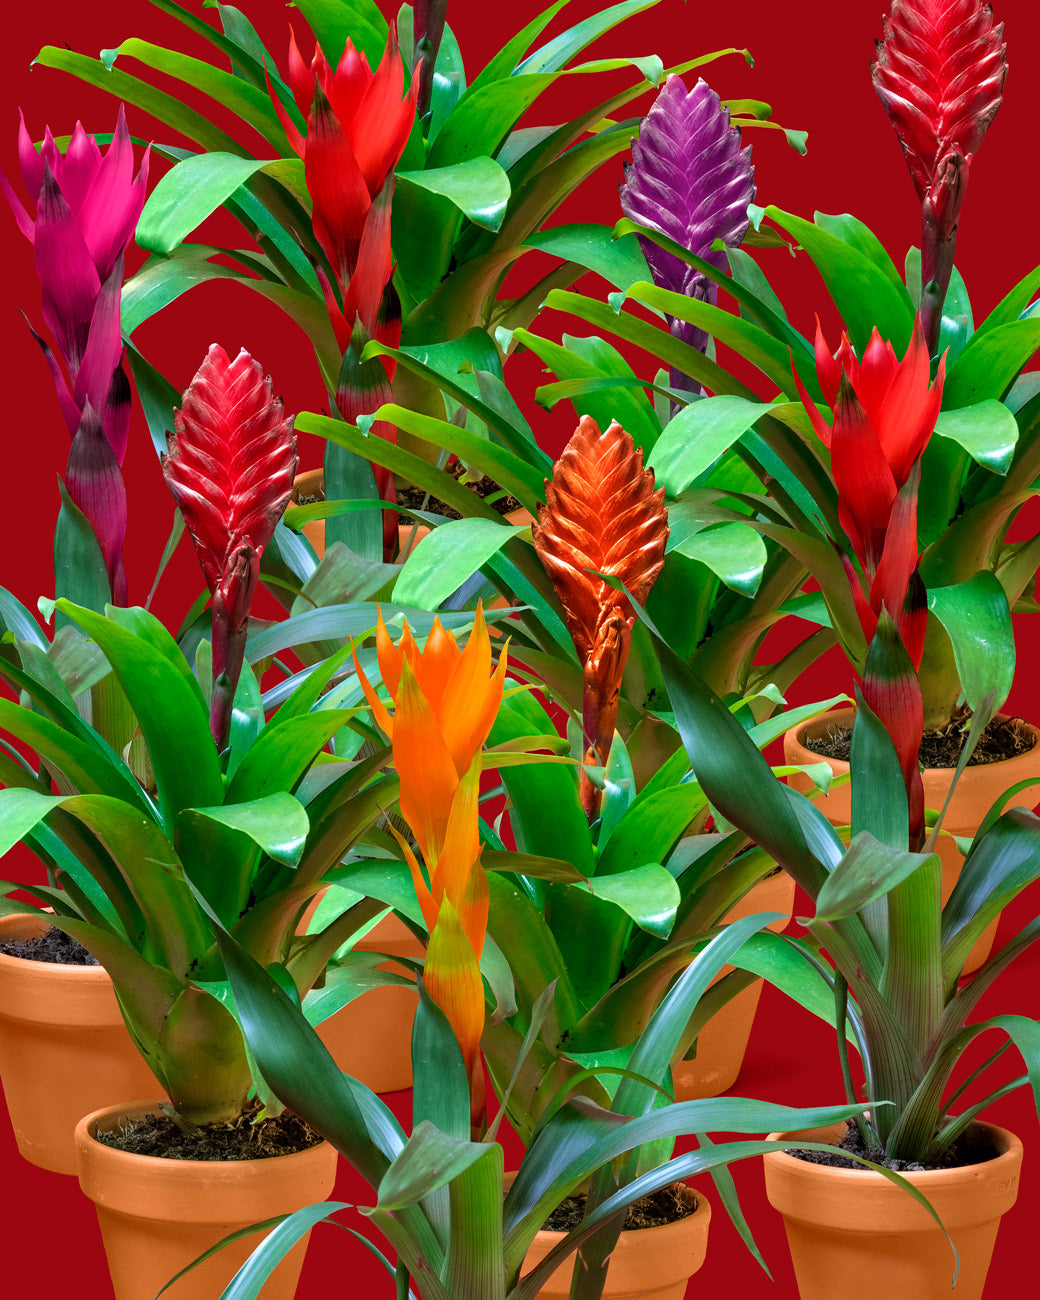 Several epiphytic Bromeliads (Guzmania lingulata), show off their beautiful inflorecences in a rainbow of color at Tula Plants & Design.